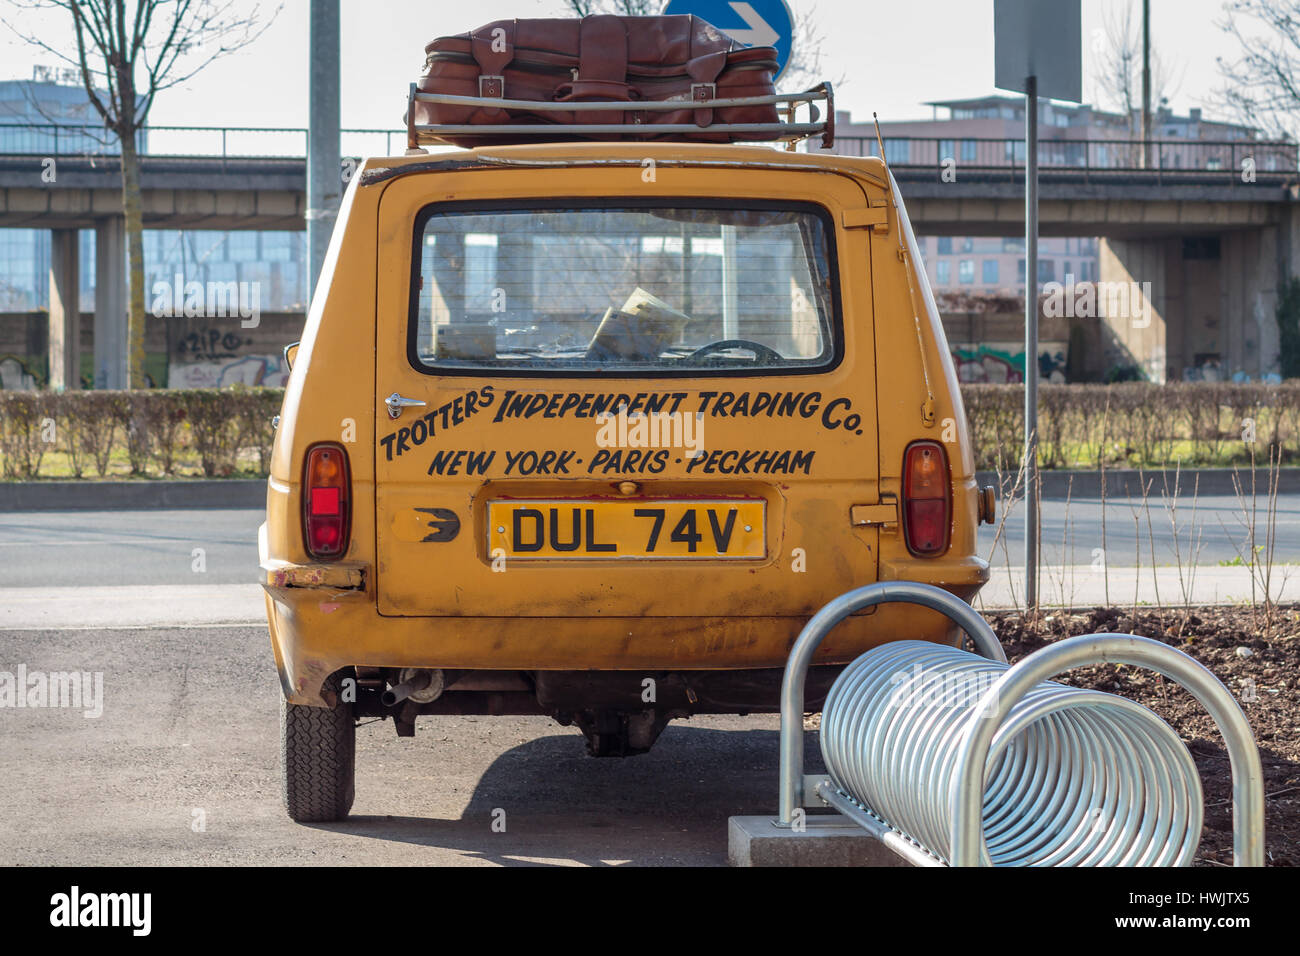 ZAGREB, CROATIA - MARCH 07, 2015: Trotters Independent Traders reliant regal as used in Only Fools and Horses. Only Fools and Horses is a British tele Stock Photo